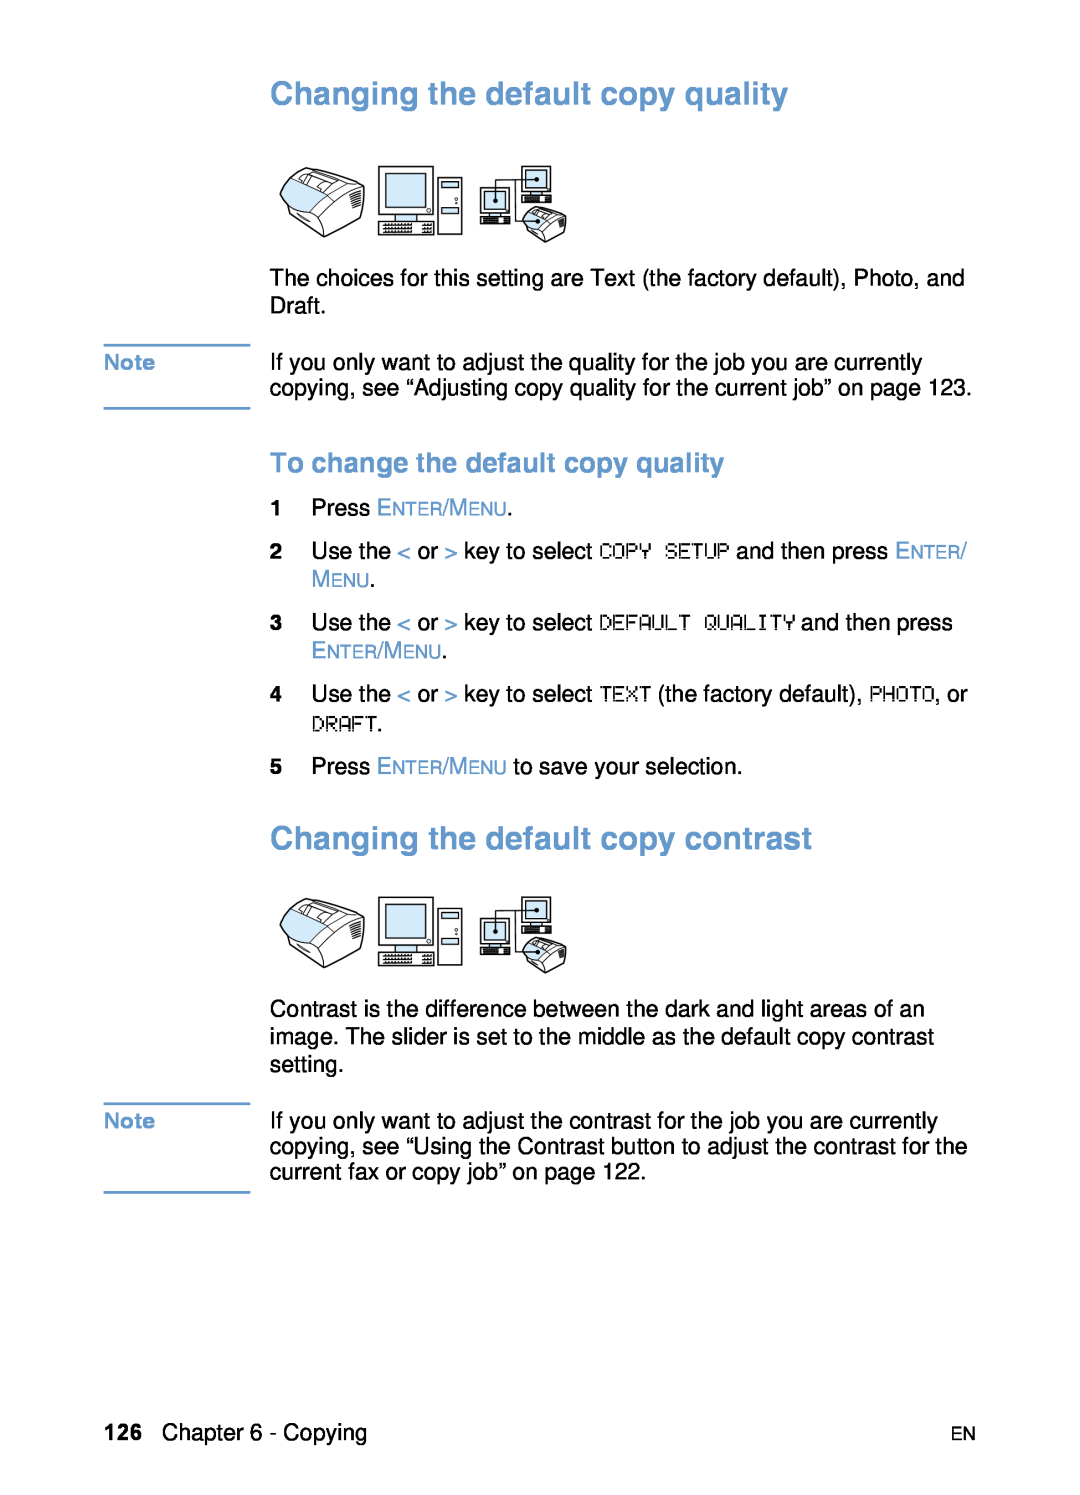 HP 3200 manual Changing the default copy quality, Changing the default copy contrast, To change the default copy quality 